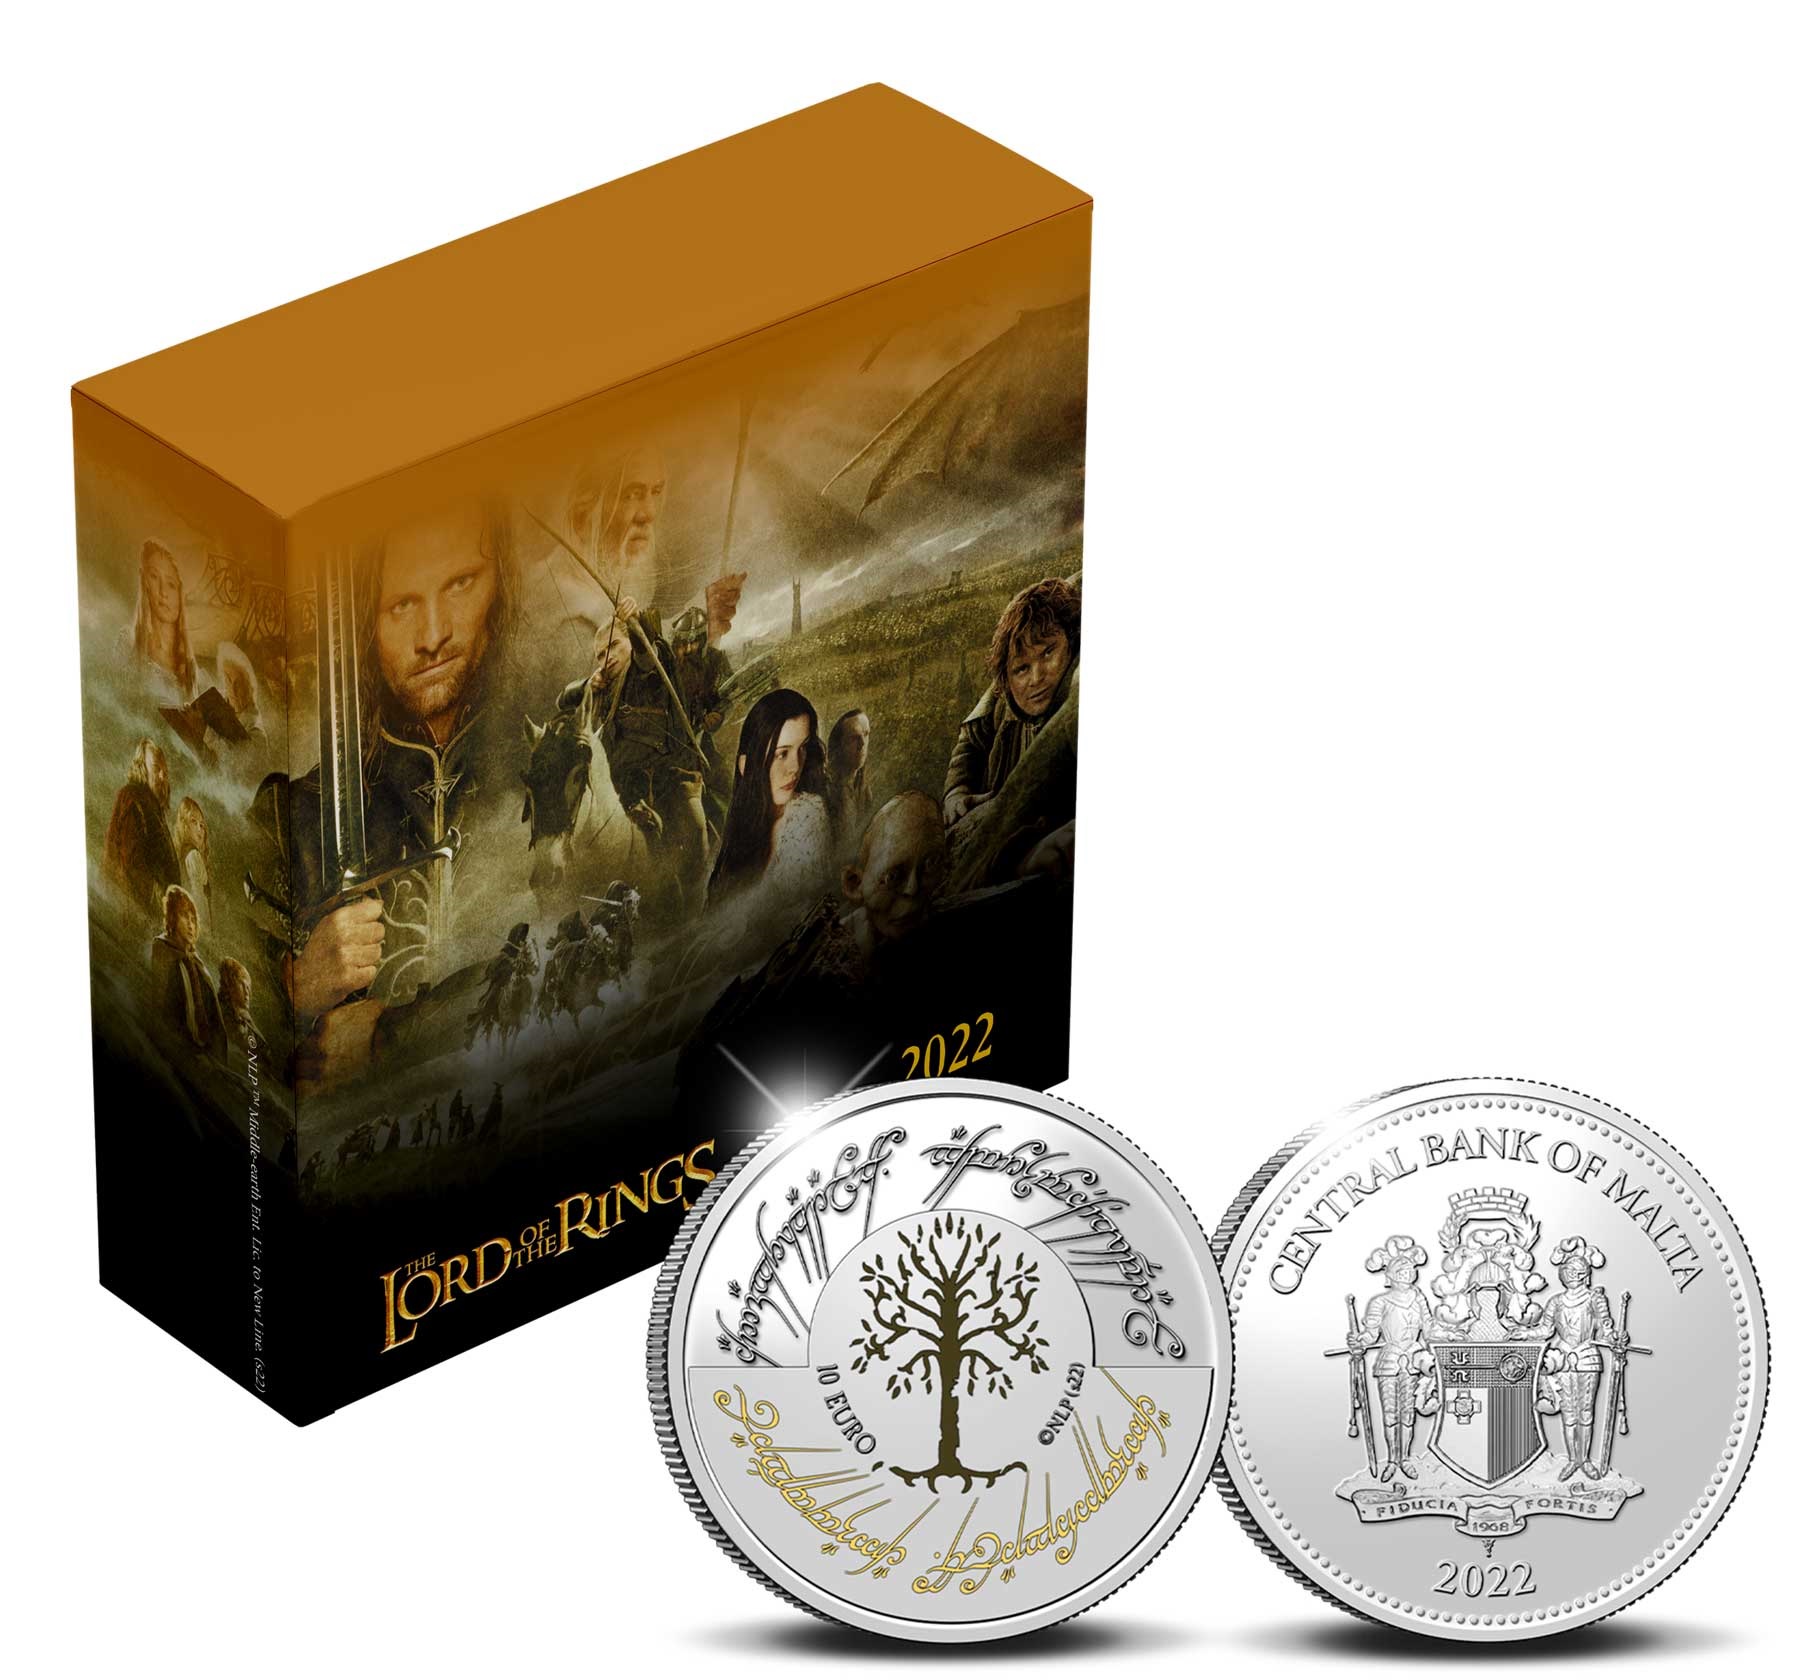 (EUR13.Proof.2022.0115263) 10 euro Malta 2022 Proof Ag - The Lord of The Rings (packaging) (zoom)